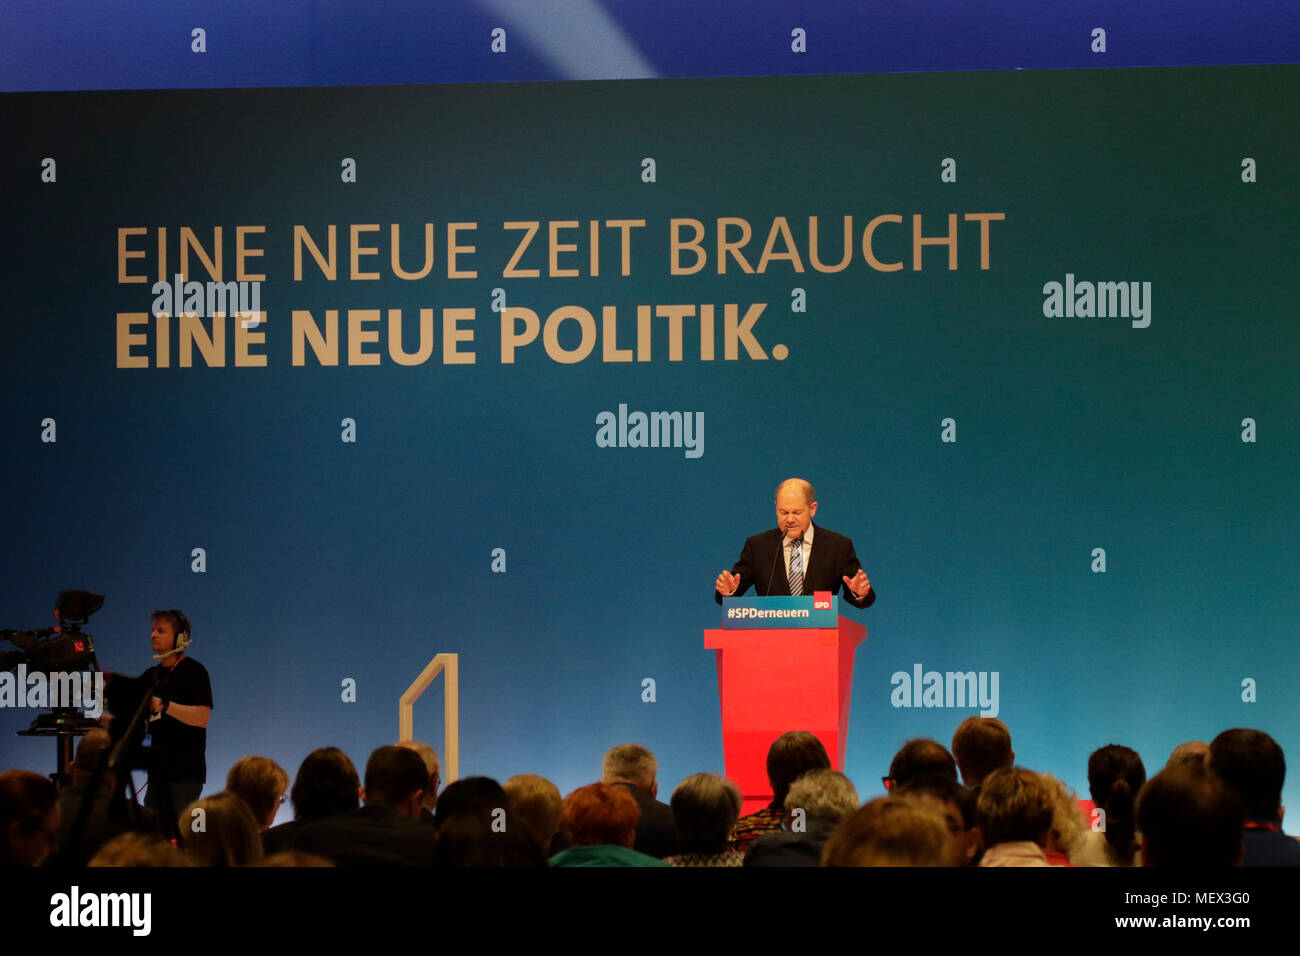 Wiesbaden, Germany. 22nd Apr, 2018. Olaf Scholz, the German Federal Minister of Finance and Vice-Chancellor as well as the acting chairman of the SPD, addresses the party convention. Andrea Nahles, the leader of the parliamentary party of the SPD in the Bundestag (German Parliament) has been elected as the new chairwoman of the SPD (Social Democratic Party of Germany). She won with 66% against her opponent Simone Lange in a contested election. She is the first women to lead the party in its 150 year long history. Credit: Michael Debets/Pacific Press/Alamy Live News Stock Photo